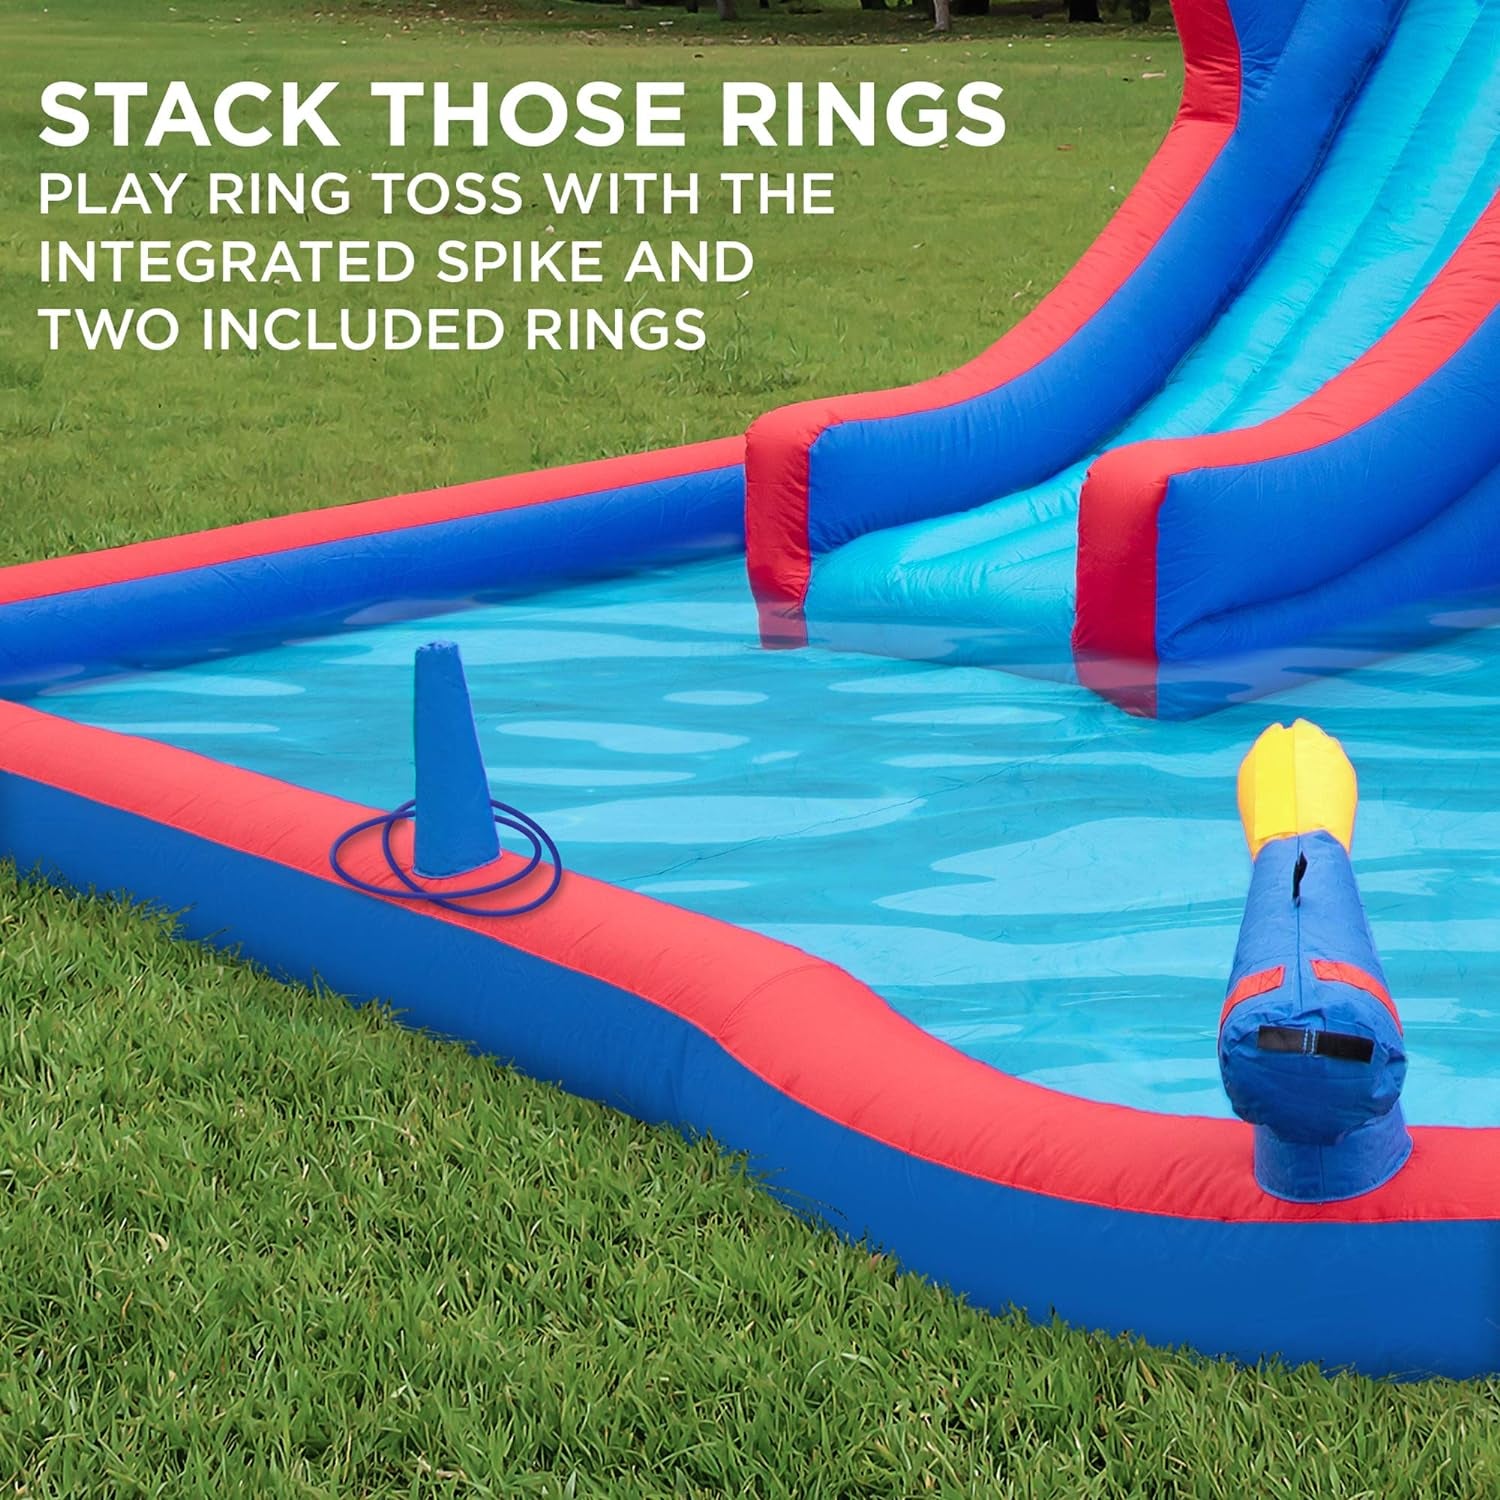 2-In-1 Bounce & Blast Inflatable Water Slide Park – Heavy-Duty for Outdoor Fun - Climbing Wall, Slide, Bouncer & Splash Pool – Easy to Set Up, Included Air Pump & Carrying Case